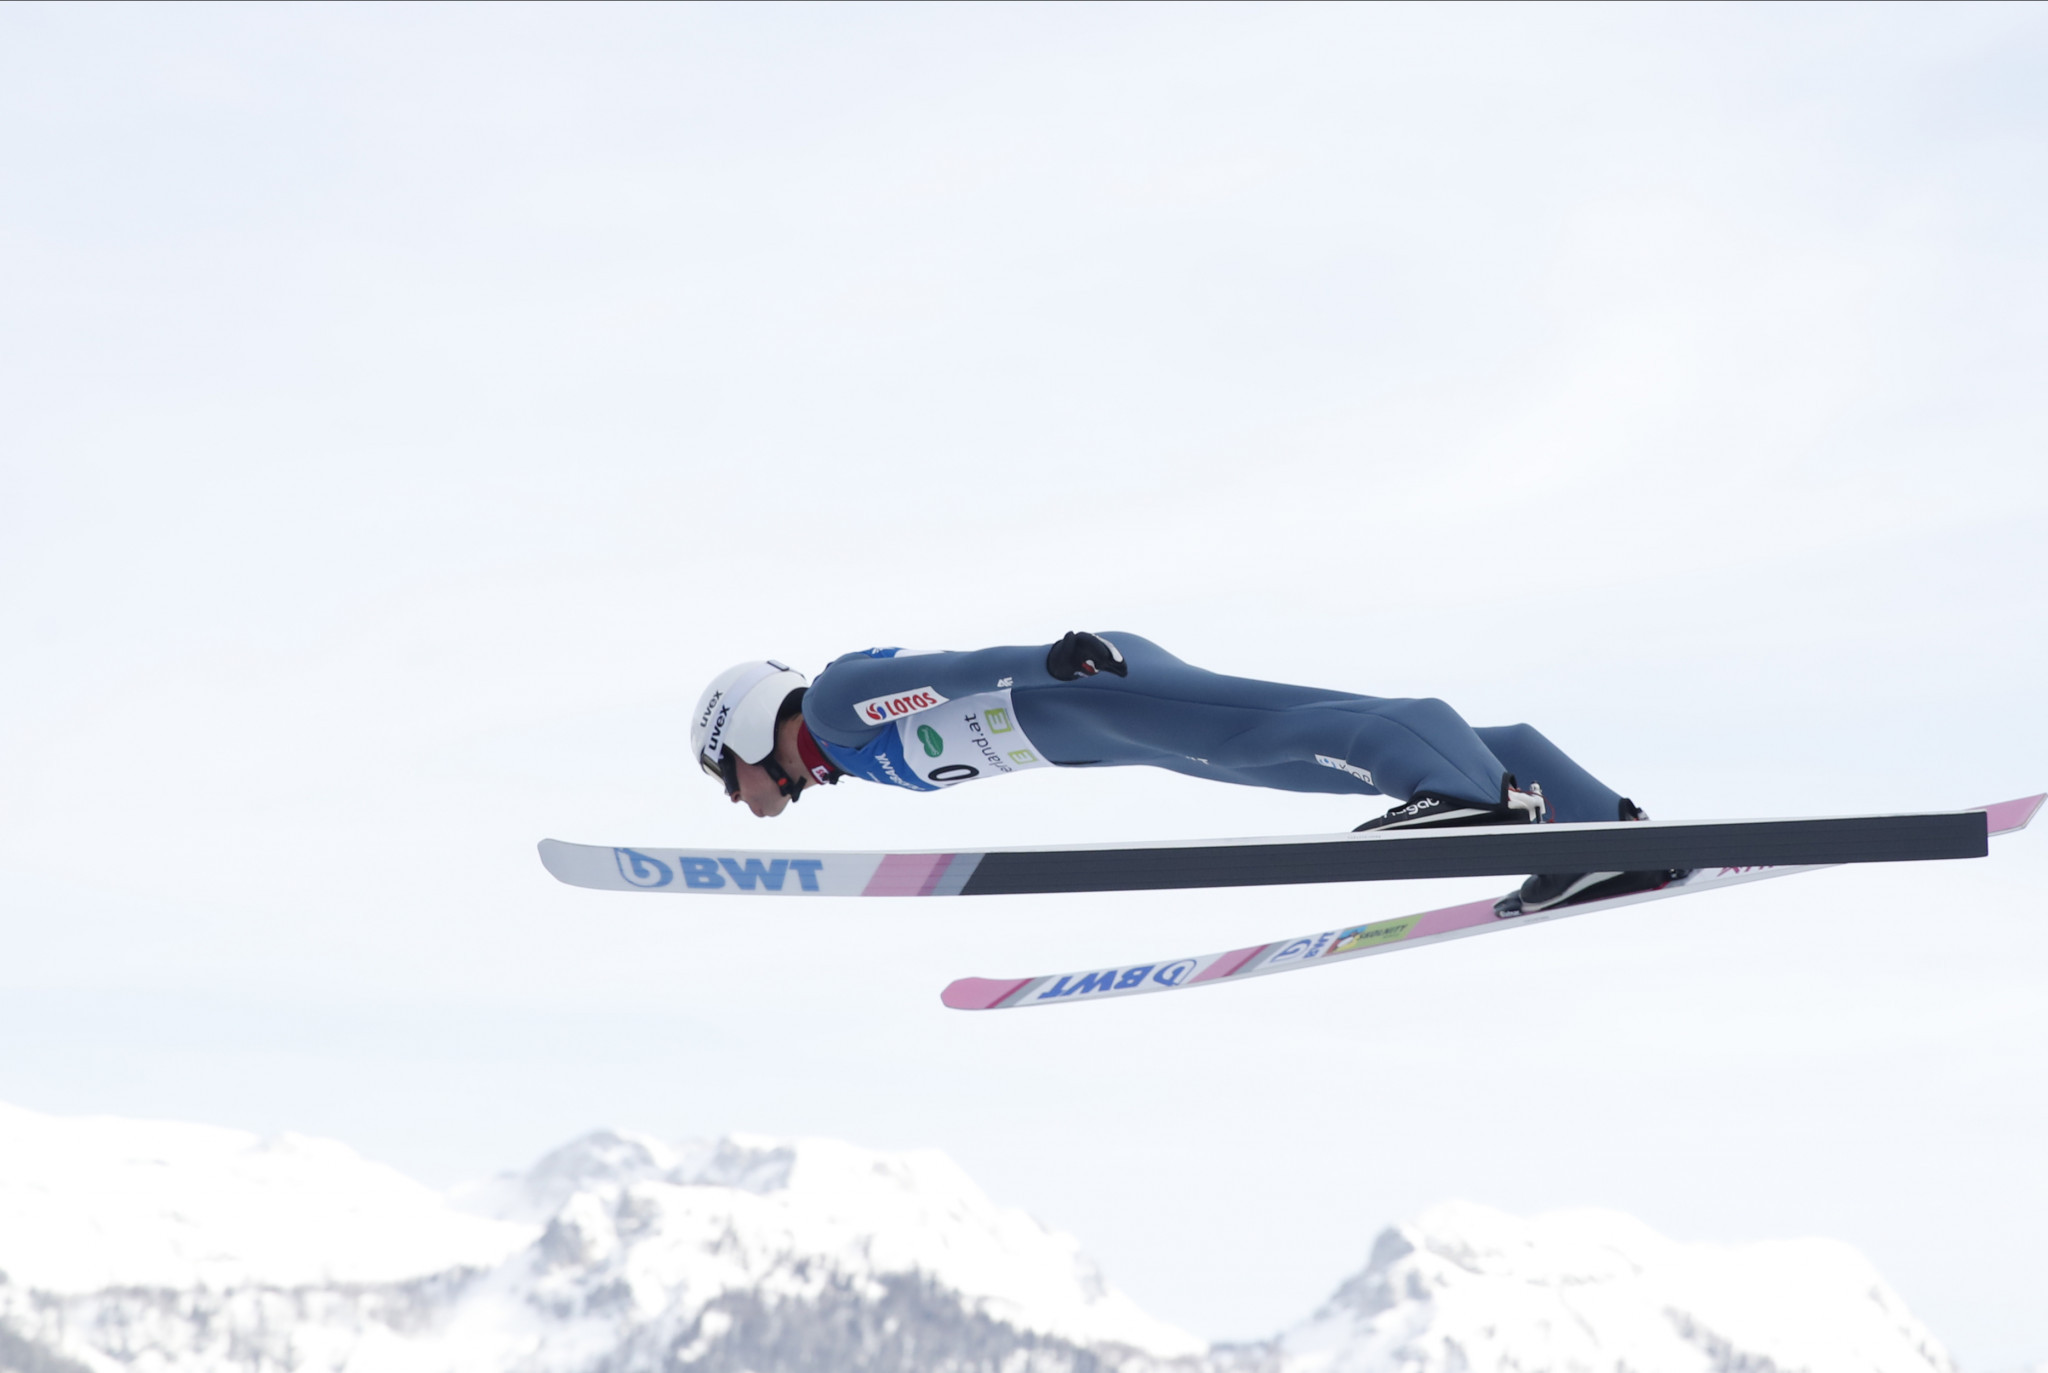 Żyła wins first Ski Jumping World Cup event of the year ahead of favourites